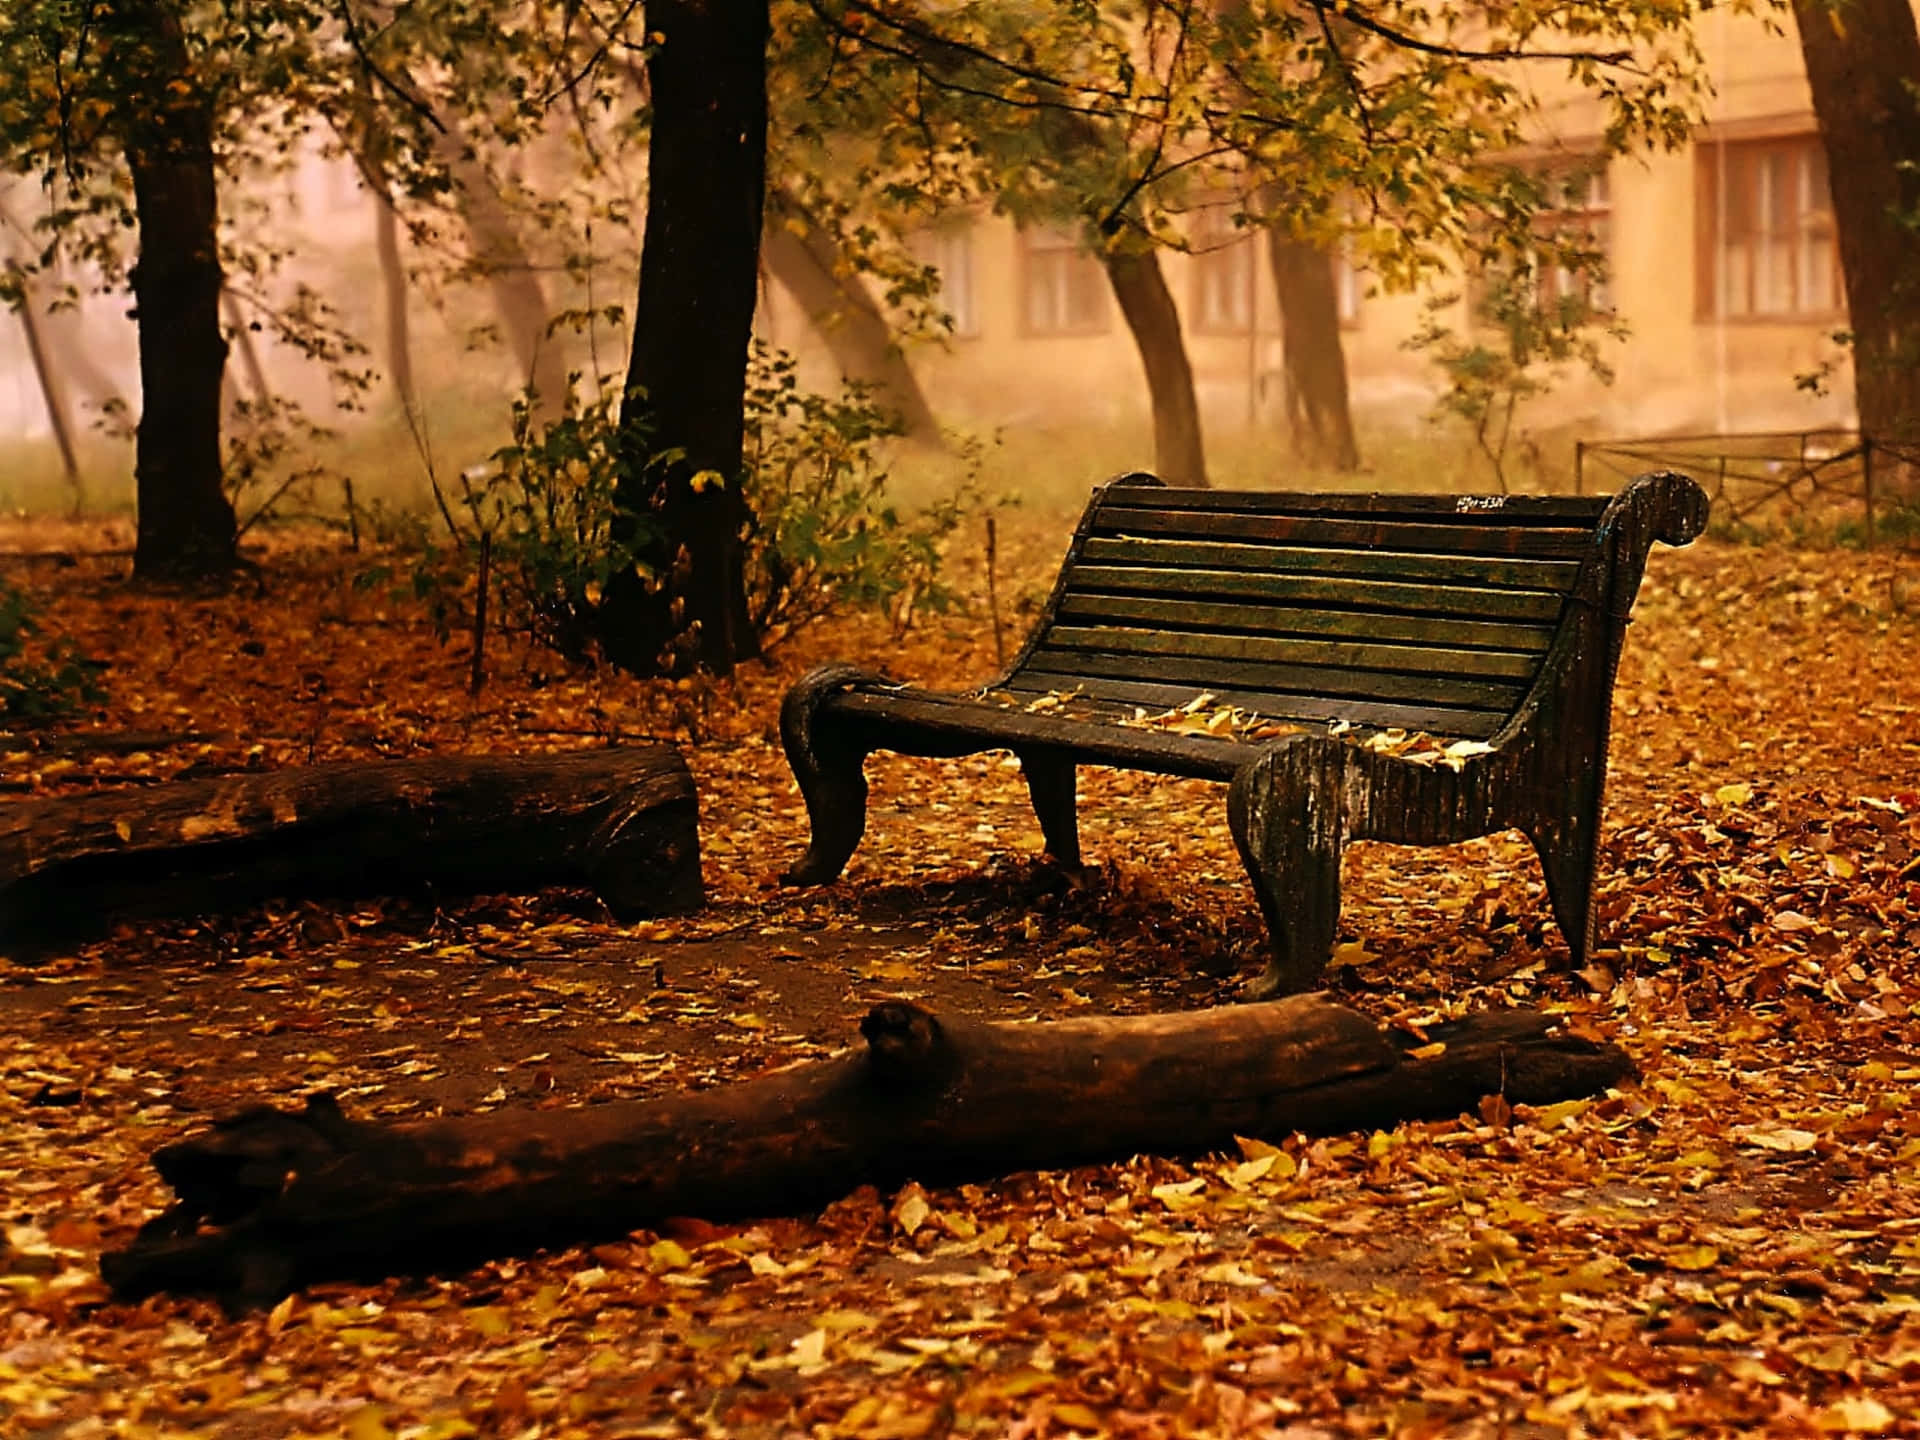 Take a seat and enjoy nature’s beauty from the comfort of our cozy bench.